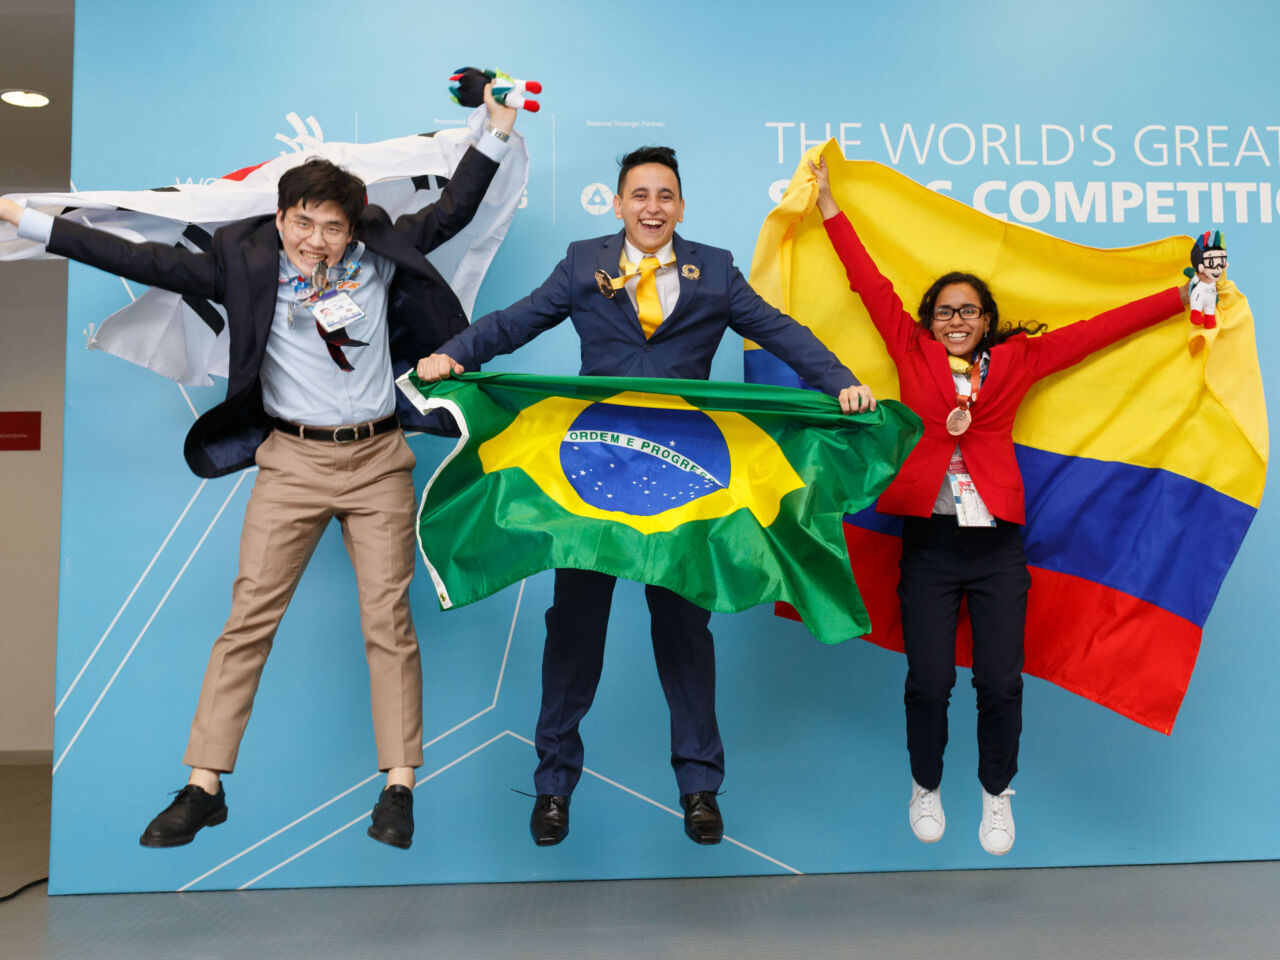 Jenifer Cardona Guevara celebrates by leaping into the air with fellow medal winners in the skill of Mechanical Engineering CAD at WorldSkills Kazan 2019.